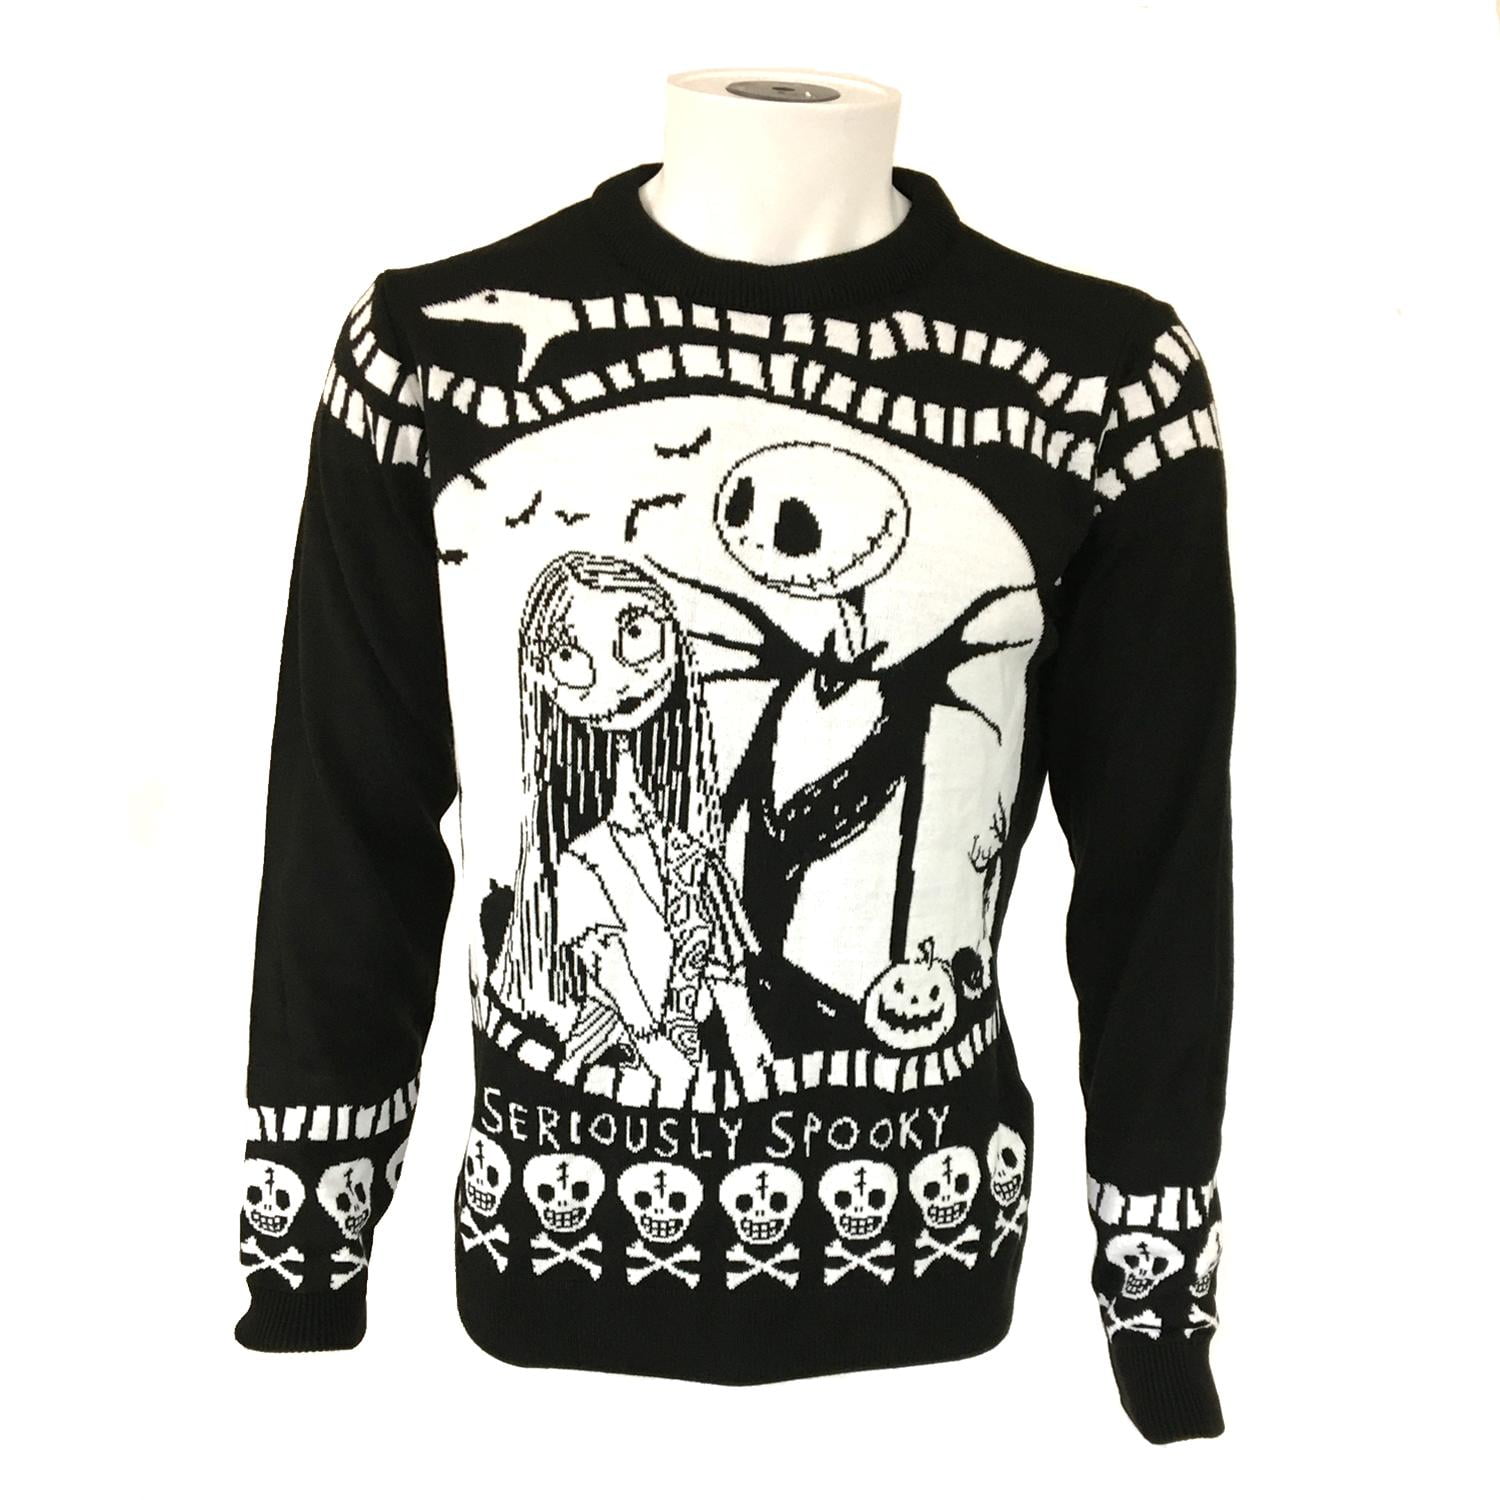 The Nightmare Before Christmas Christmas Jumper Sweater Seriously Spooky Men's 